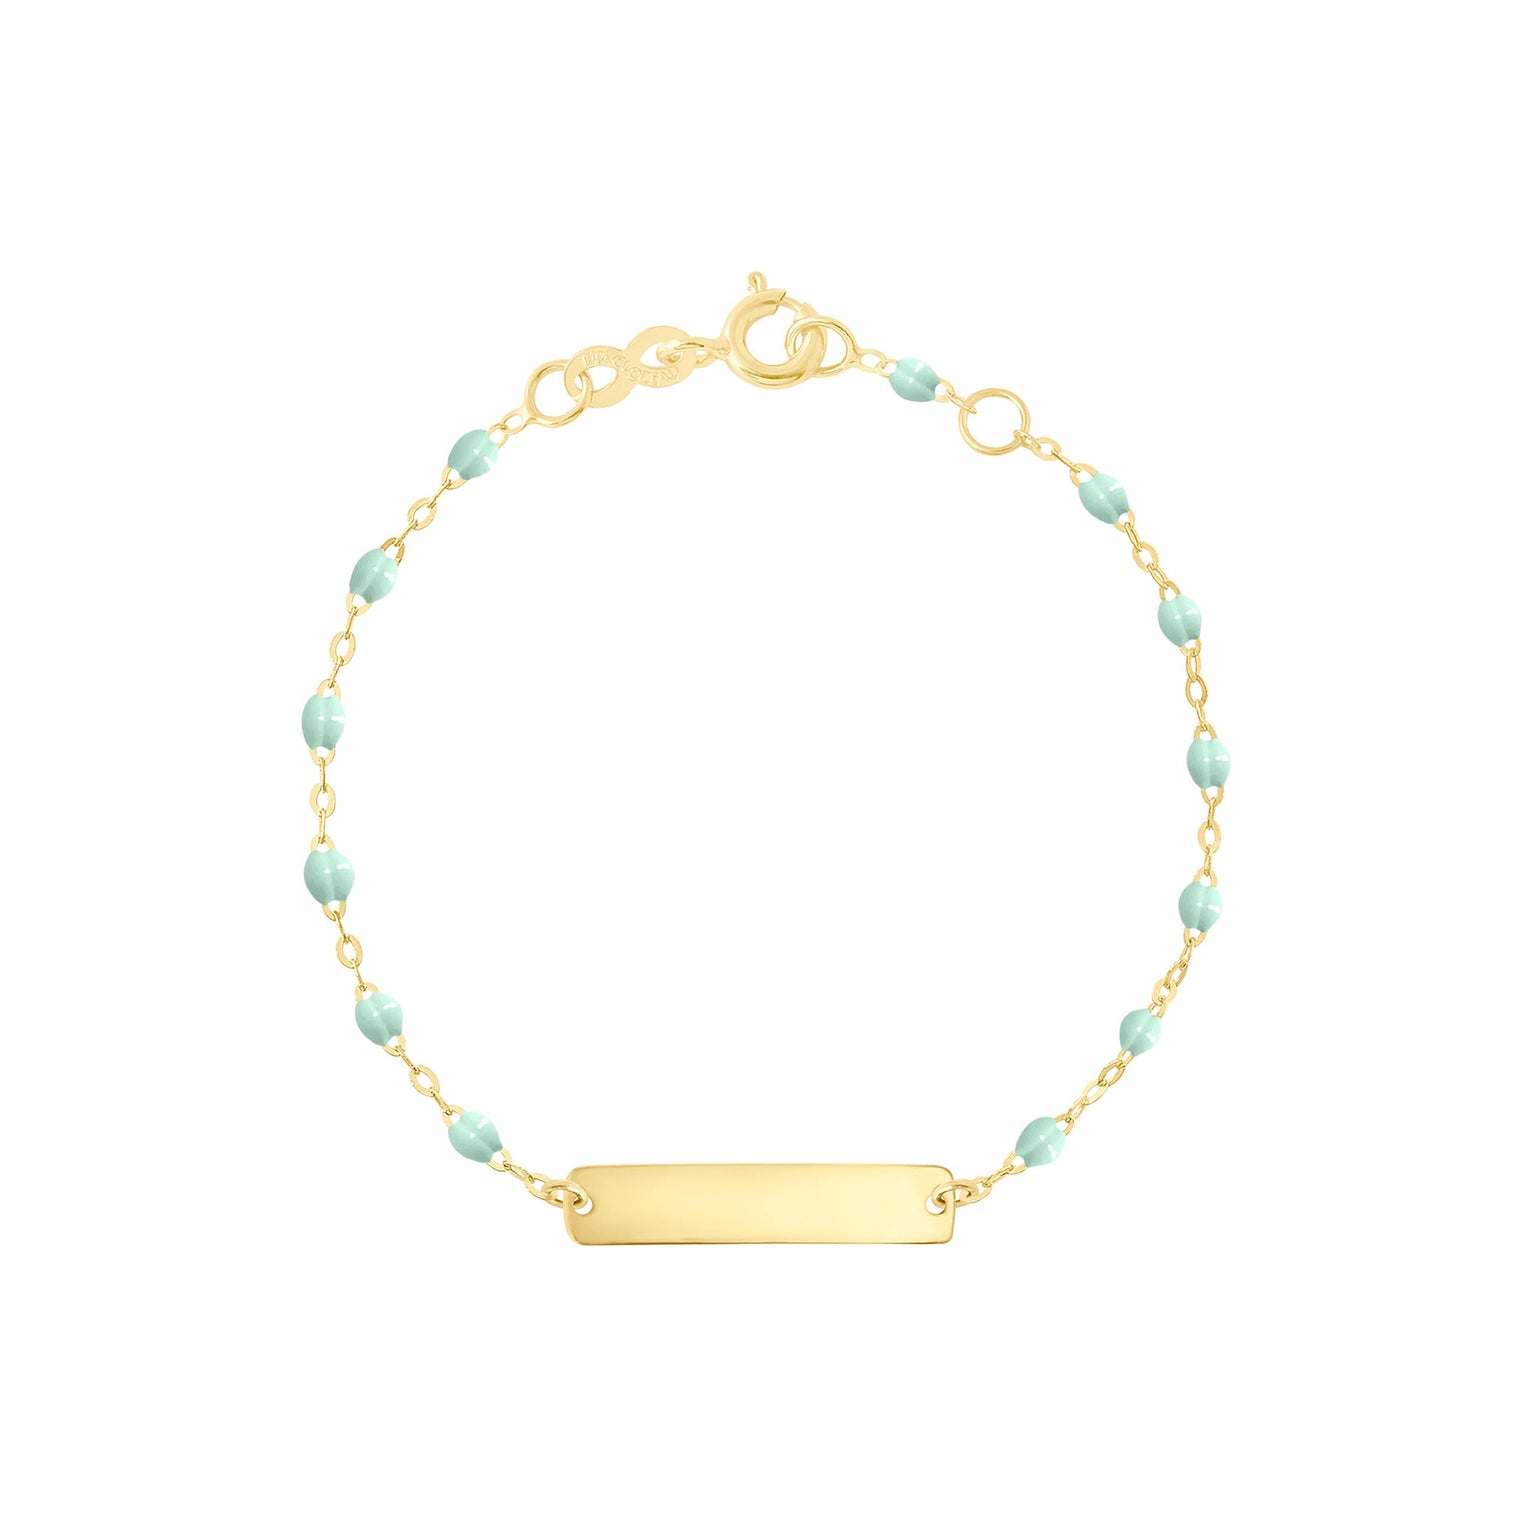 Macy's Cultured Freshwater Pearl and Dyed Jade Bracelet in 14k Gold - Macy's